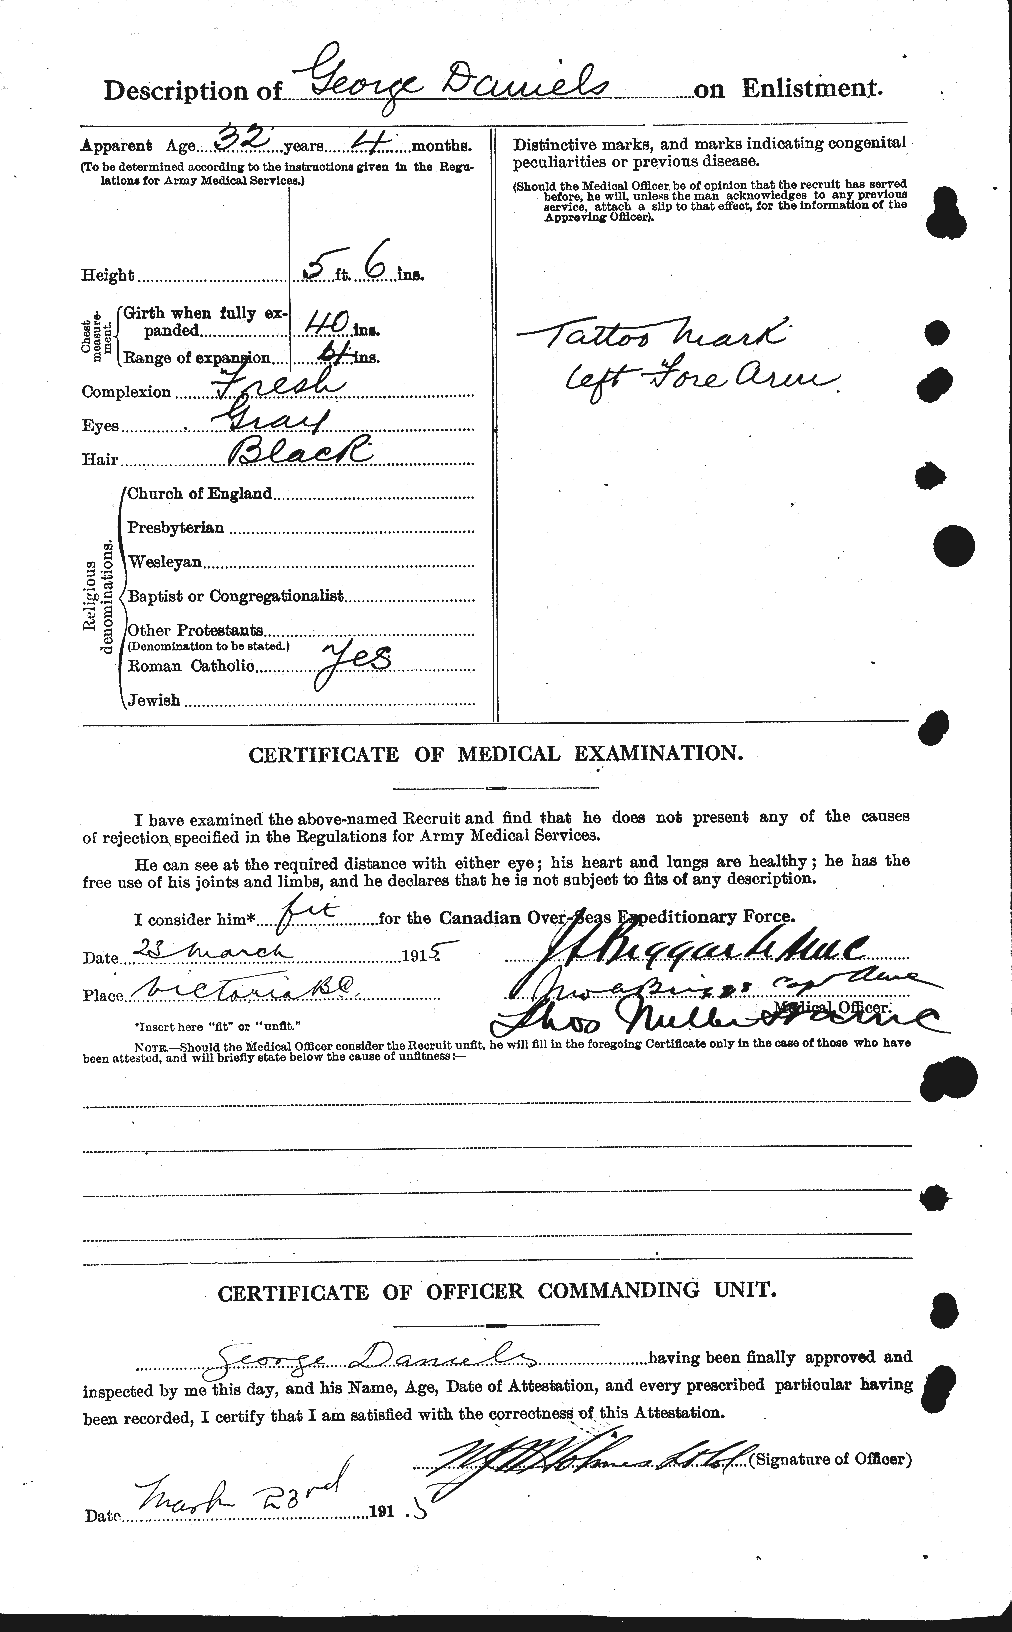 Personnel Records of the First World War - CEF 279599b